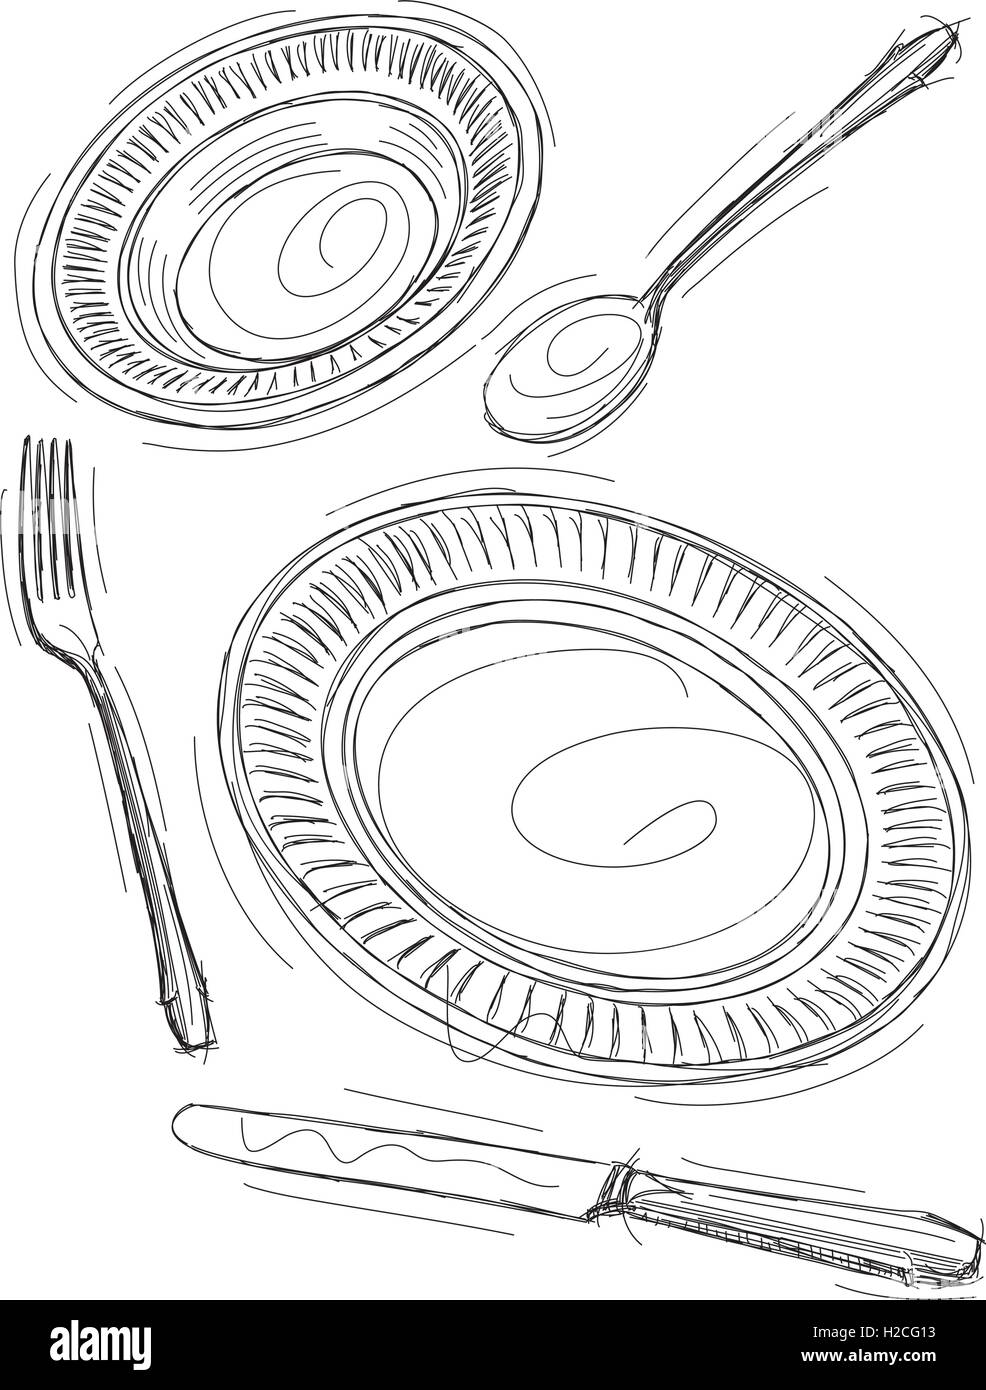 Sketchy Place Setting Plate, bowl, fork, spoon, and knife sketches Stock Vector